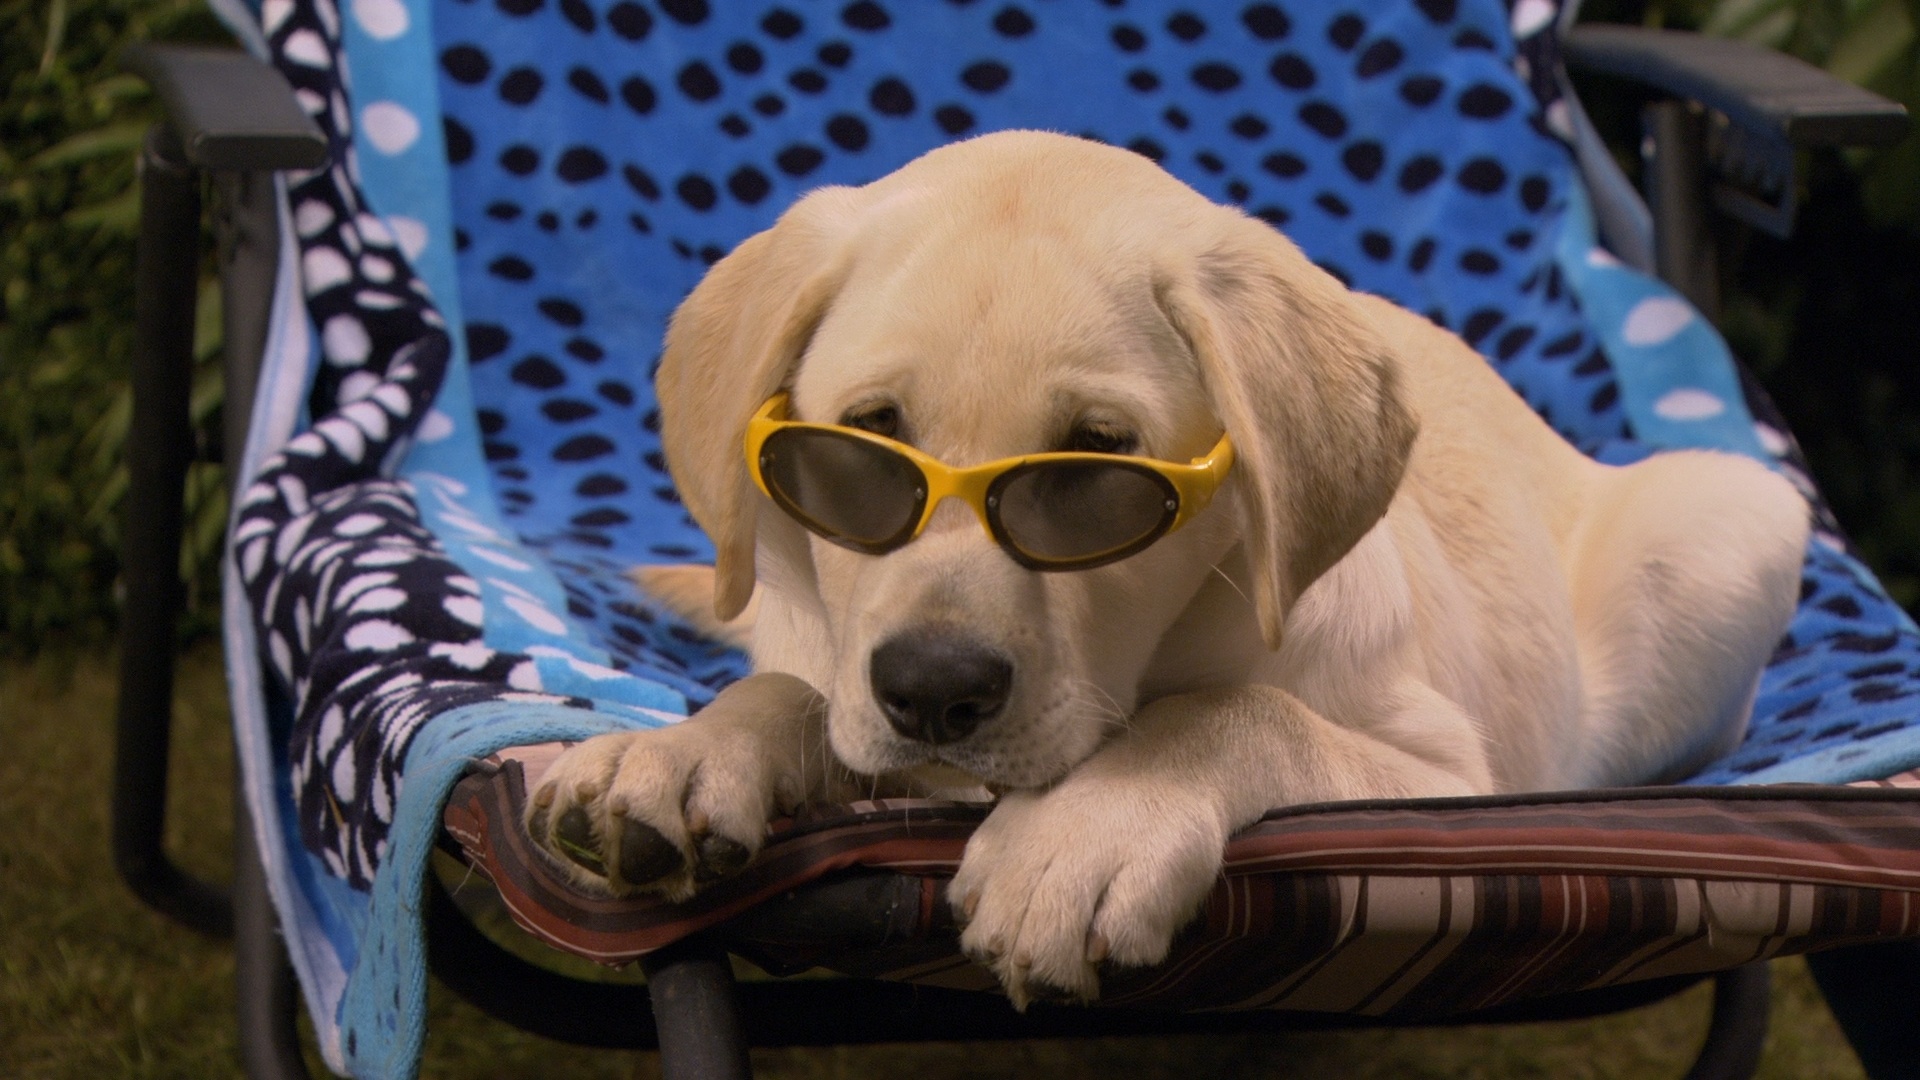 Marley and Me: 22 different yellow labradors played the part of the titular dog. 1920x1080 Full HD Wallpaper.